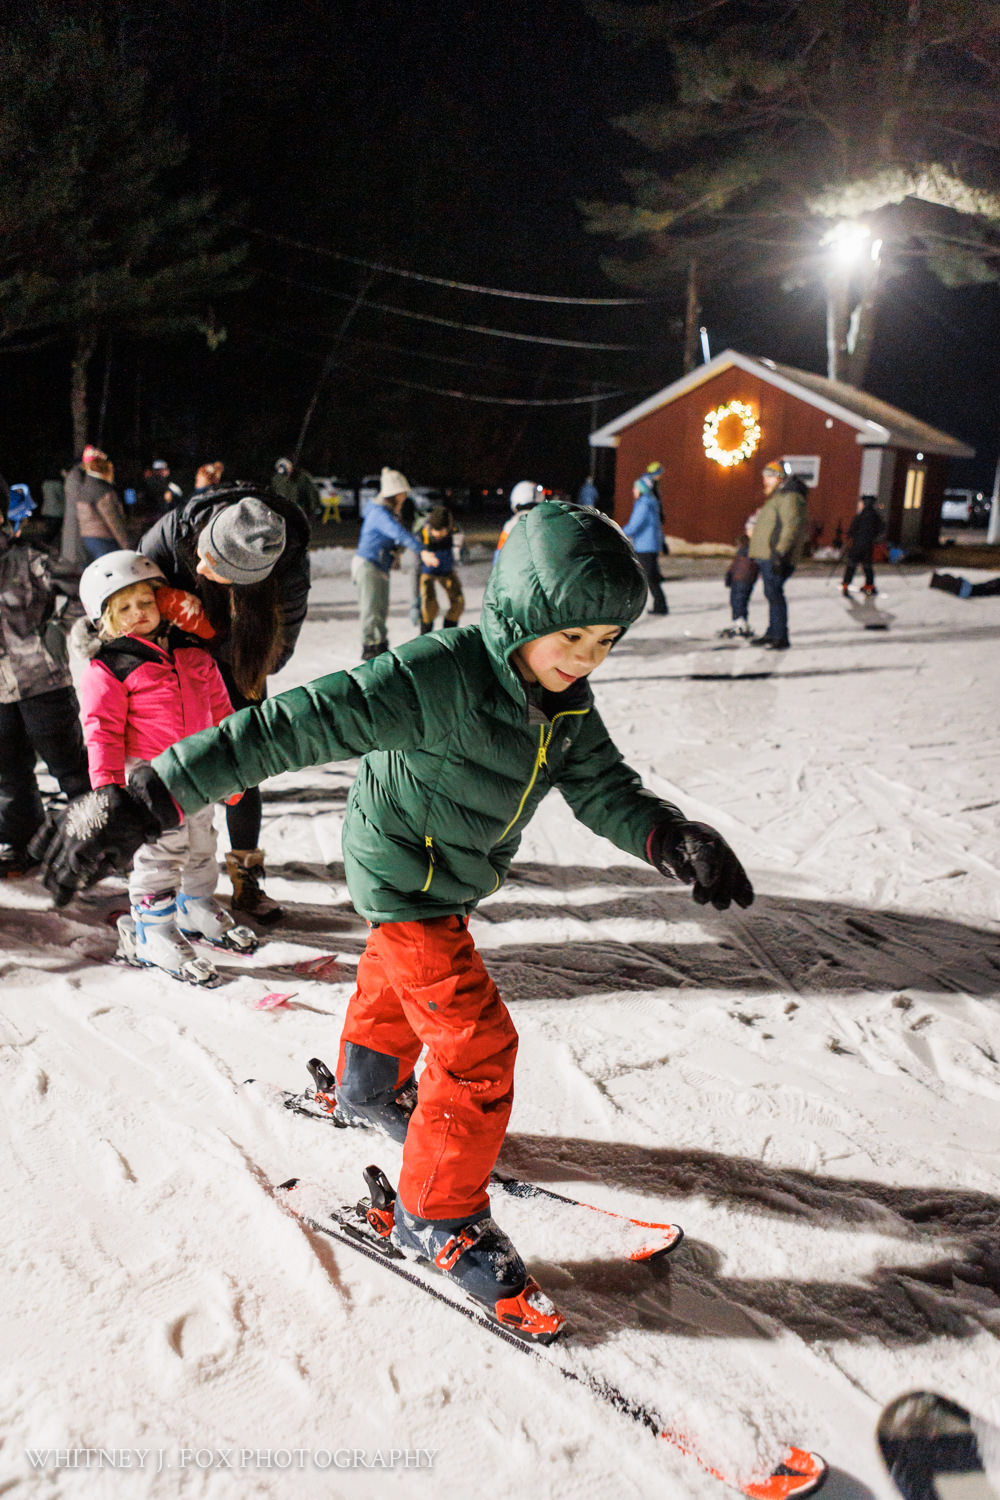 652 winter kids welcome to winter 2022 lost valley auburn maine documentary event photographer whitney j fox 3982 w